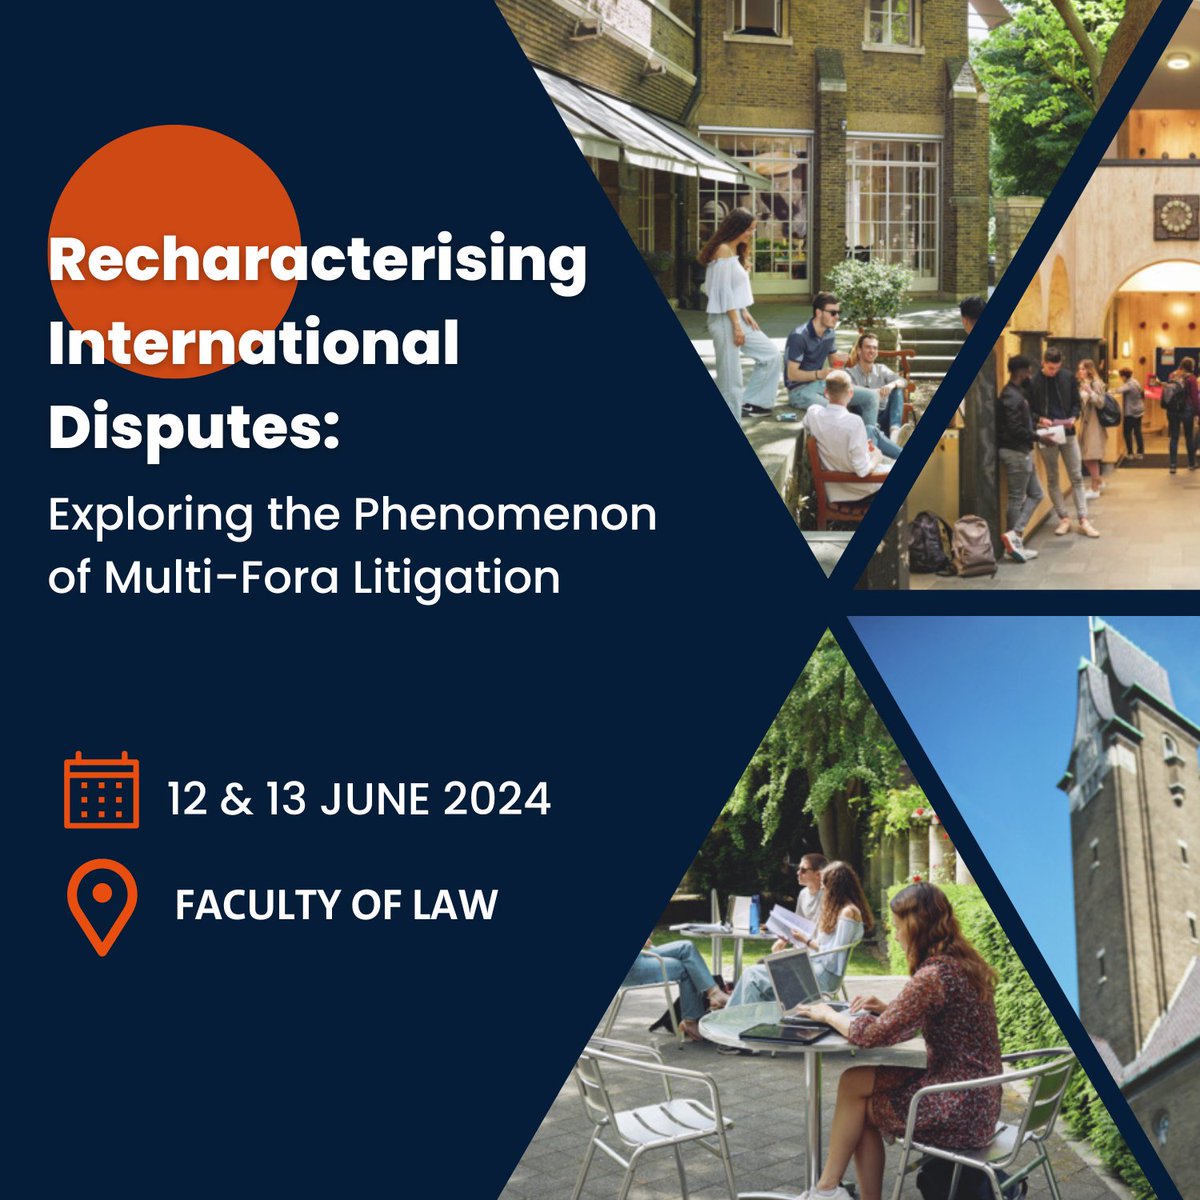 Join us for a deep dive into the shifting landscape of international disputes at: 🌐 Recharacterising International Disputes: Exploring Multi-Fora Litigation Date: 12 & 13 June Location: Faculty of Law Free registration: maastrichtuniversity.nl/events/rechara…